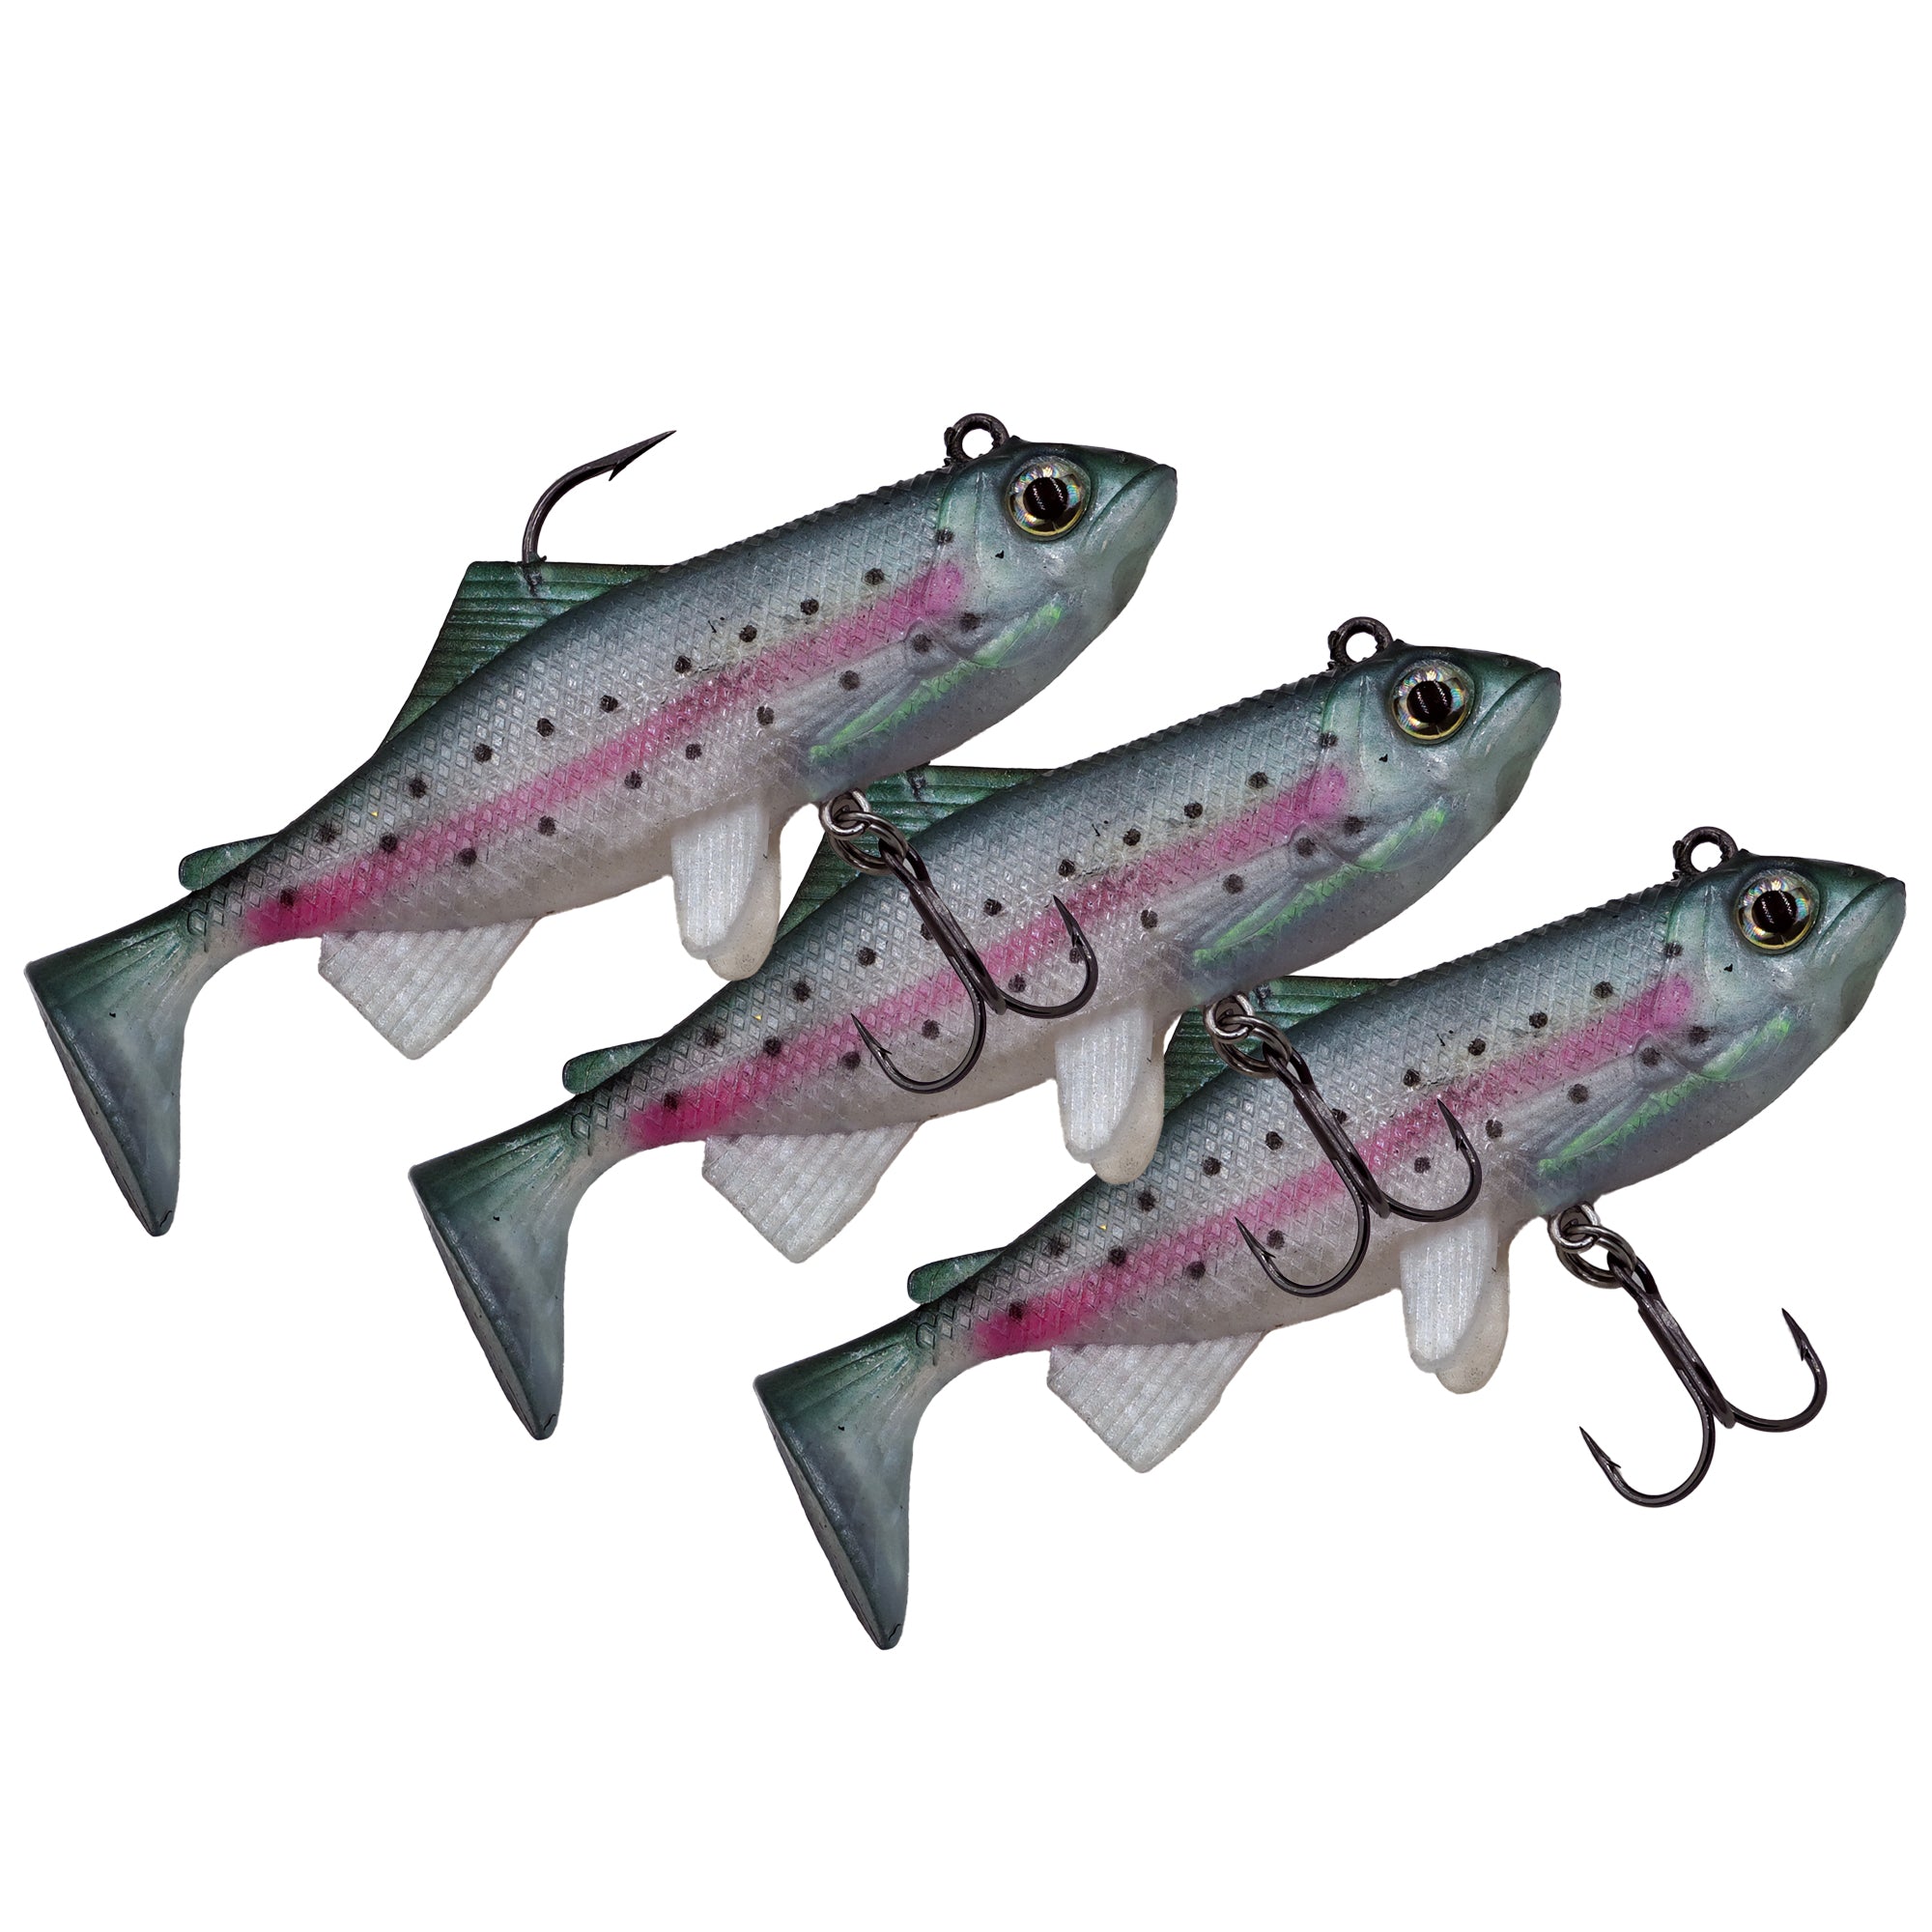 Storm WildEye Live Rainbow Trout Fishing Lures (3-Pack) Storm